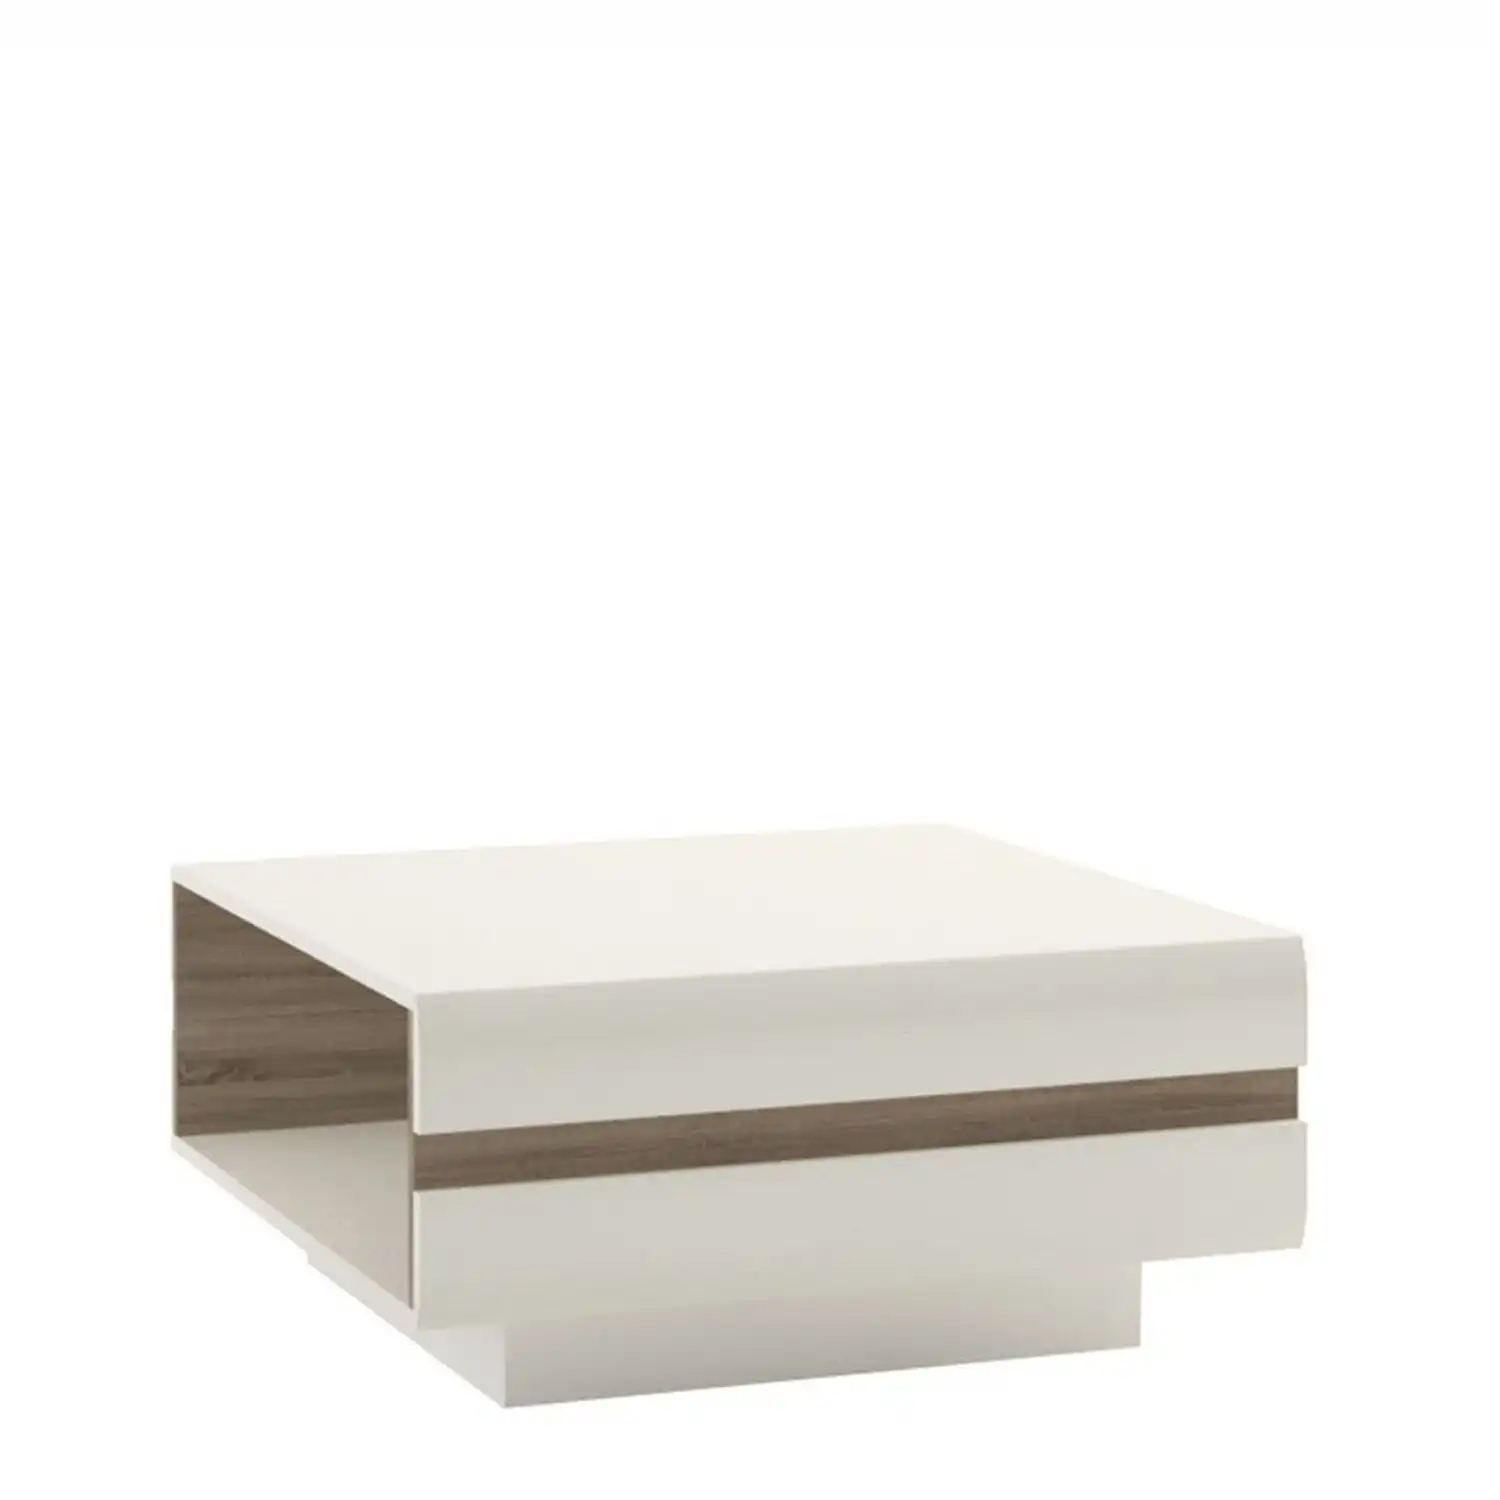 Living Small Designer Coffee Table in white With an Truffle Oak Trim